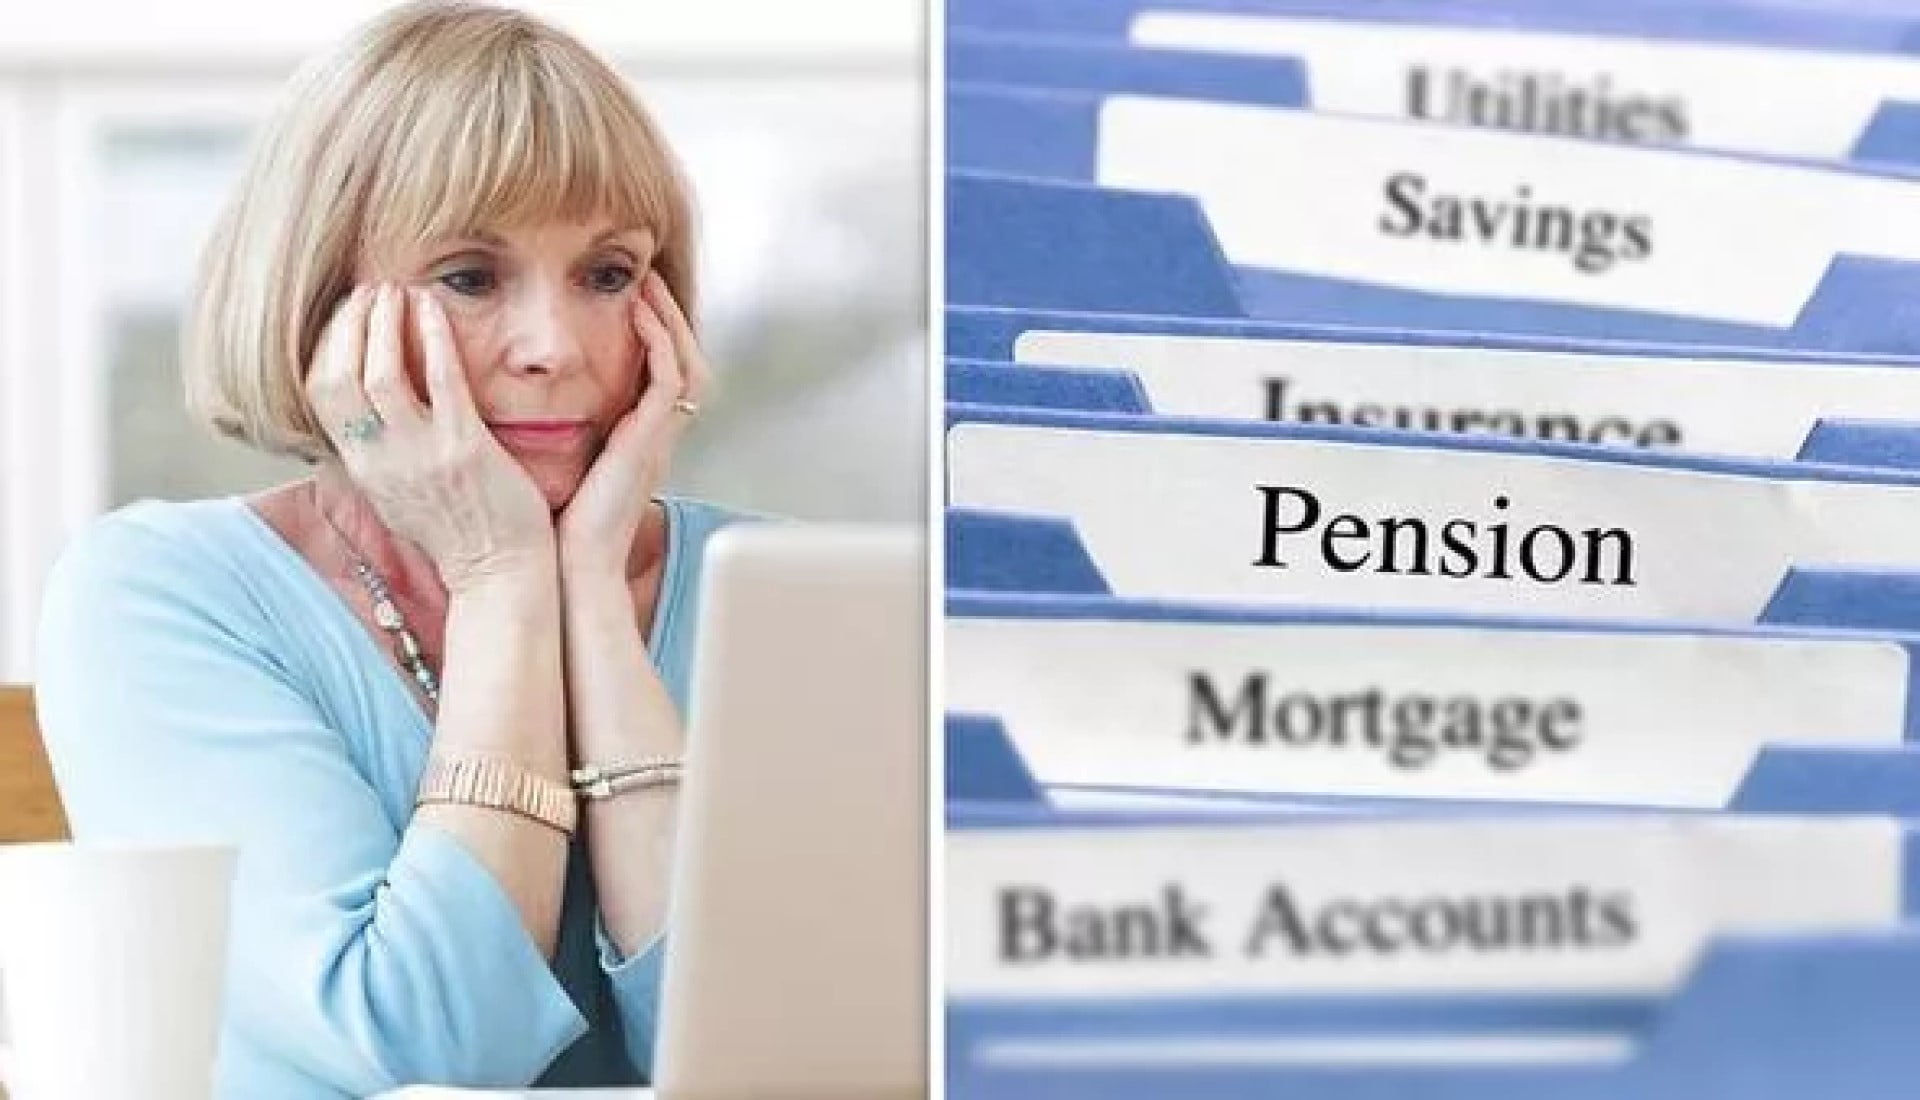 How to find your lost pension pots